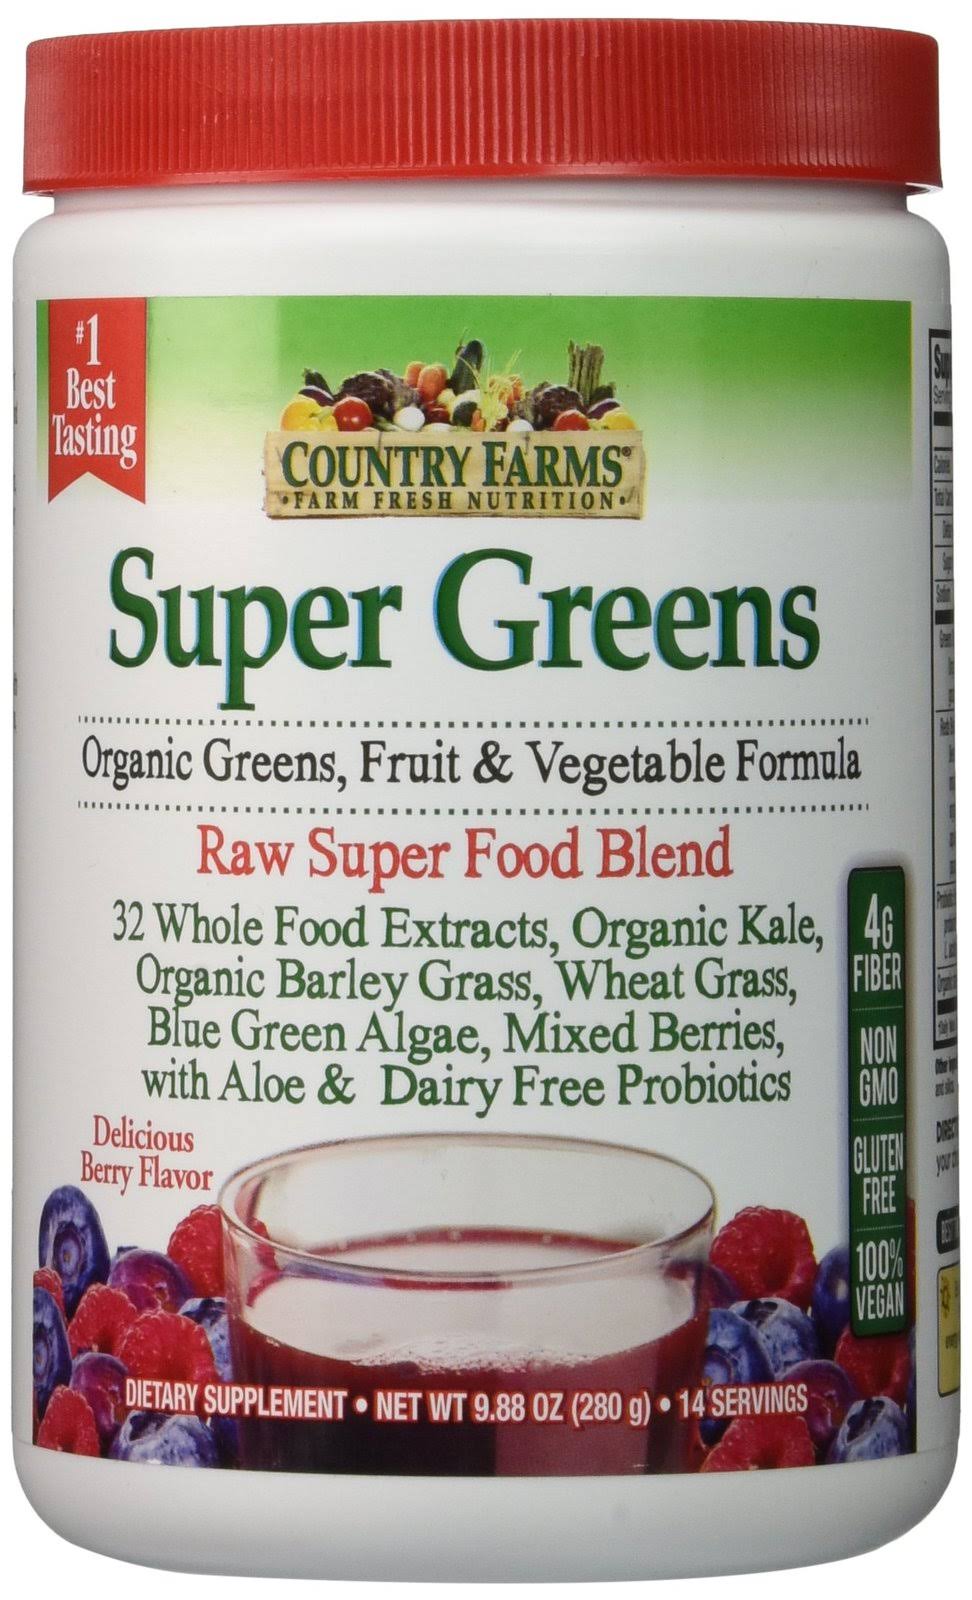 Country Farms Super Green Drink Dietary Supplement - Berry Flavor, 9.88oz